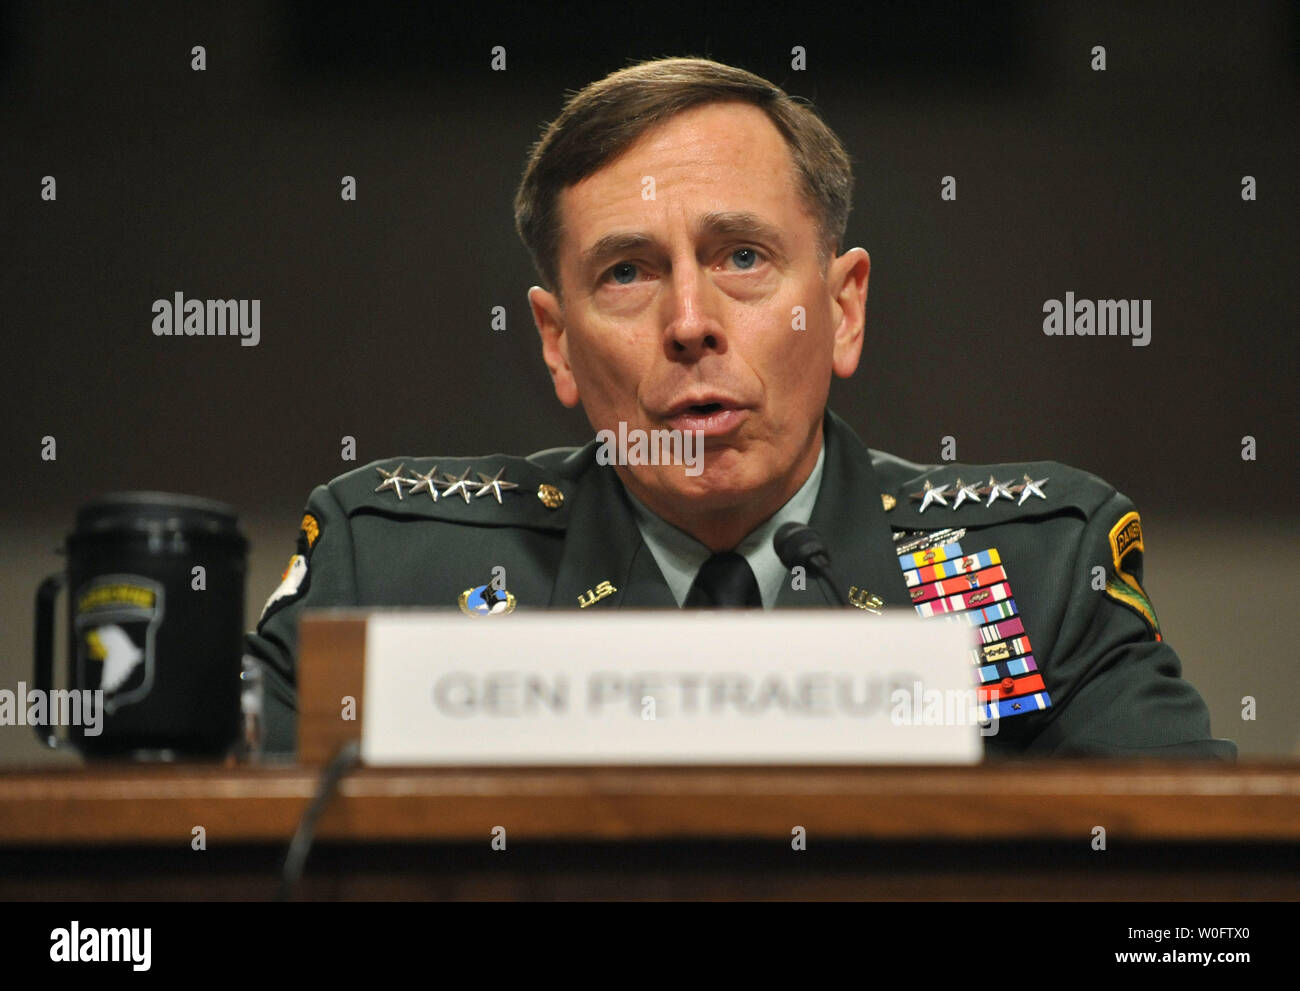 Gen. David Petraeus testifies during his confirmation hearing before the Senate Armed Services Committee to be reapportioned as commander of the International Security Assistance Force and U.S. Forces Afghanistan, on Capitol Hill in Washington on June 29, 2010.   UPI/Kevin Dietsch Stock Photo